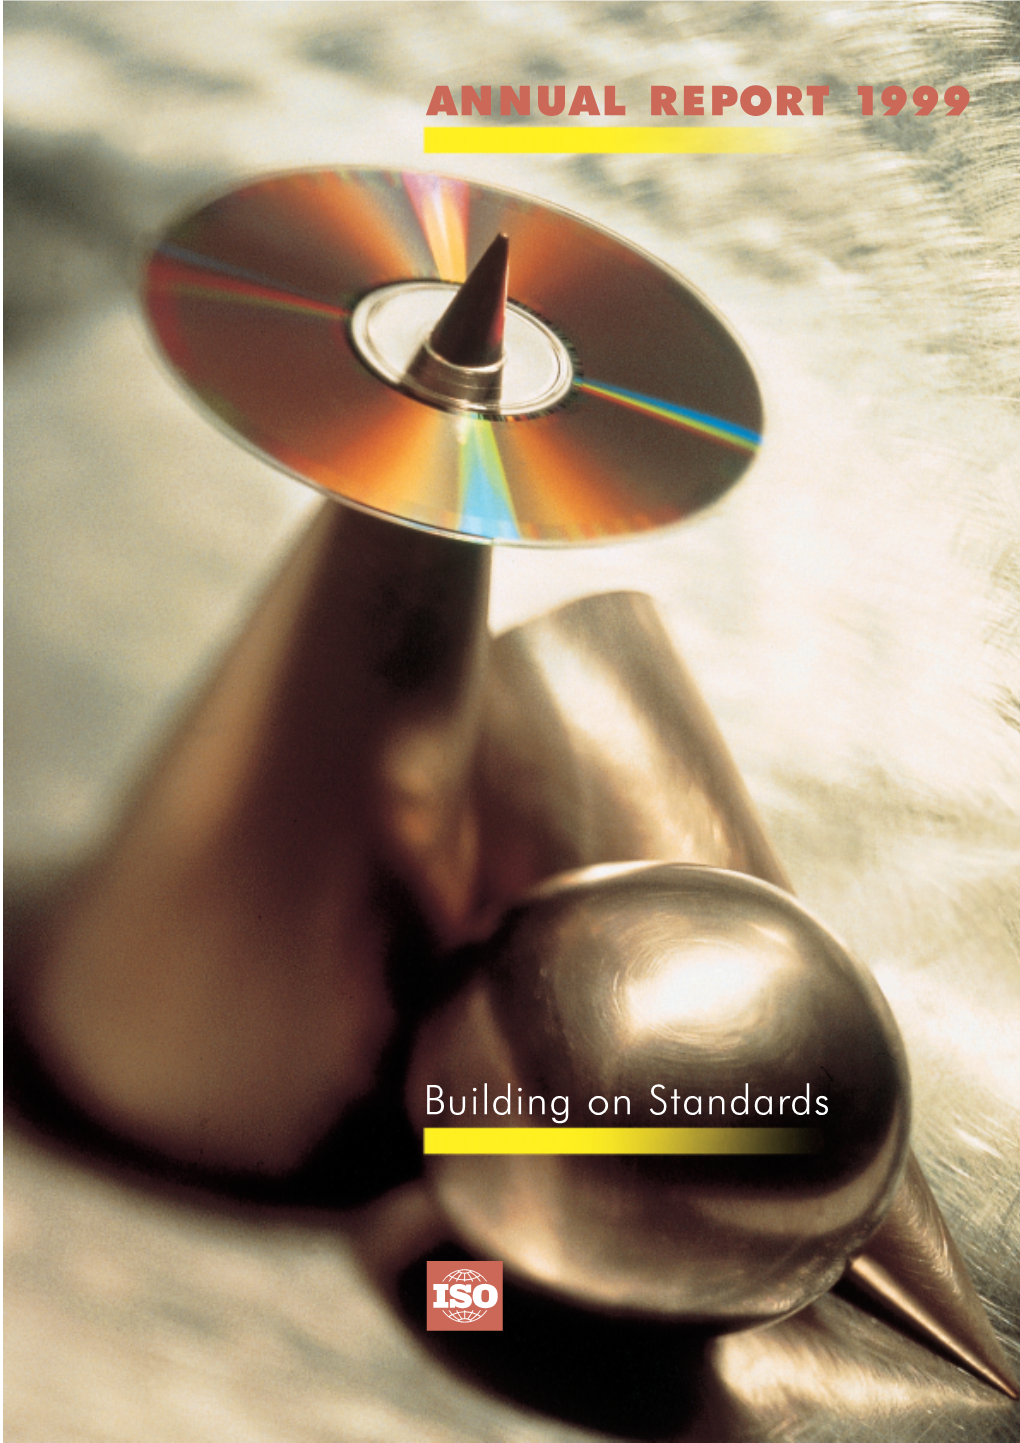 ANNUAL REPORT 1999 Building on Standards